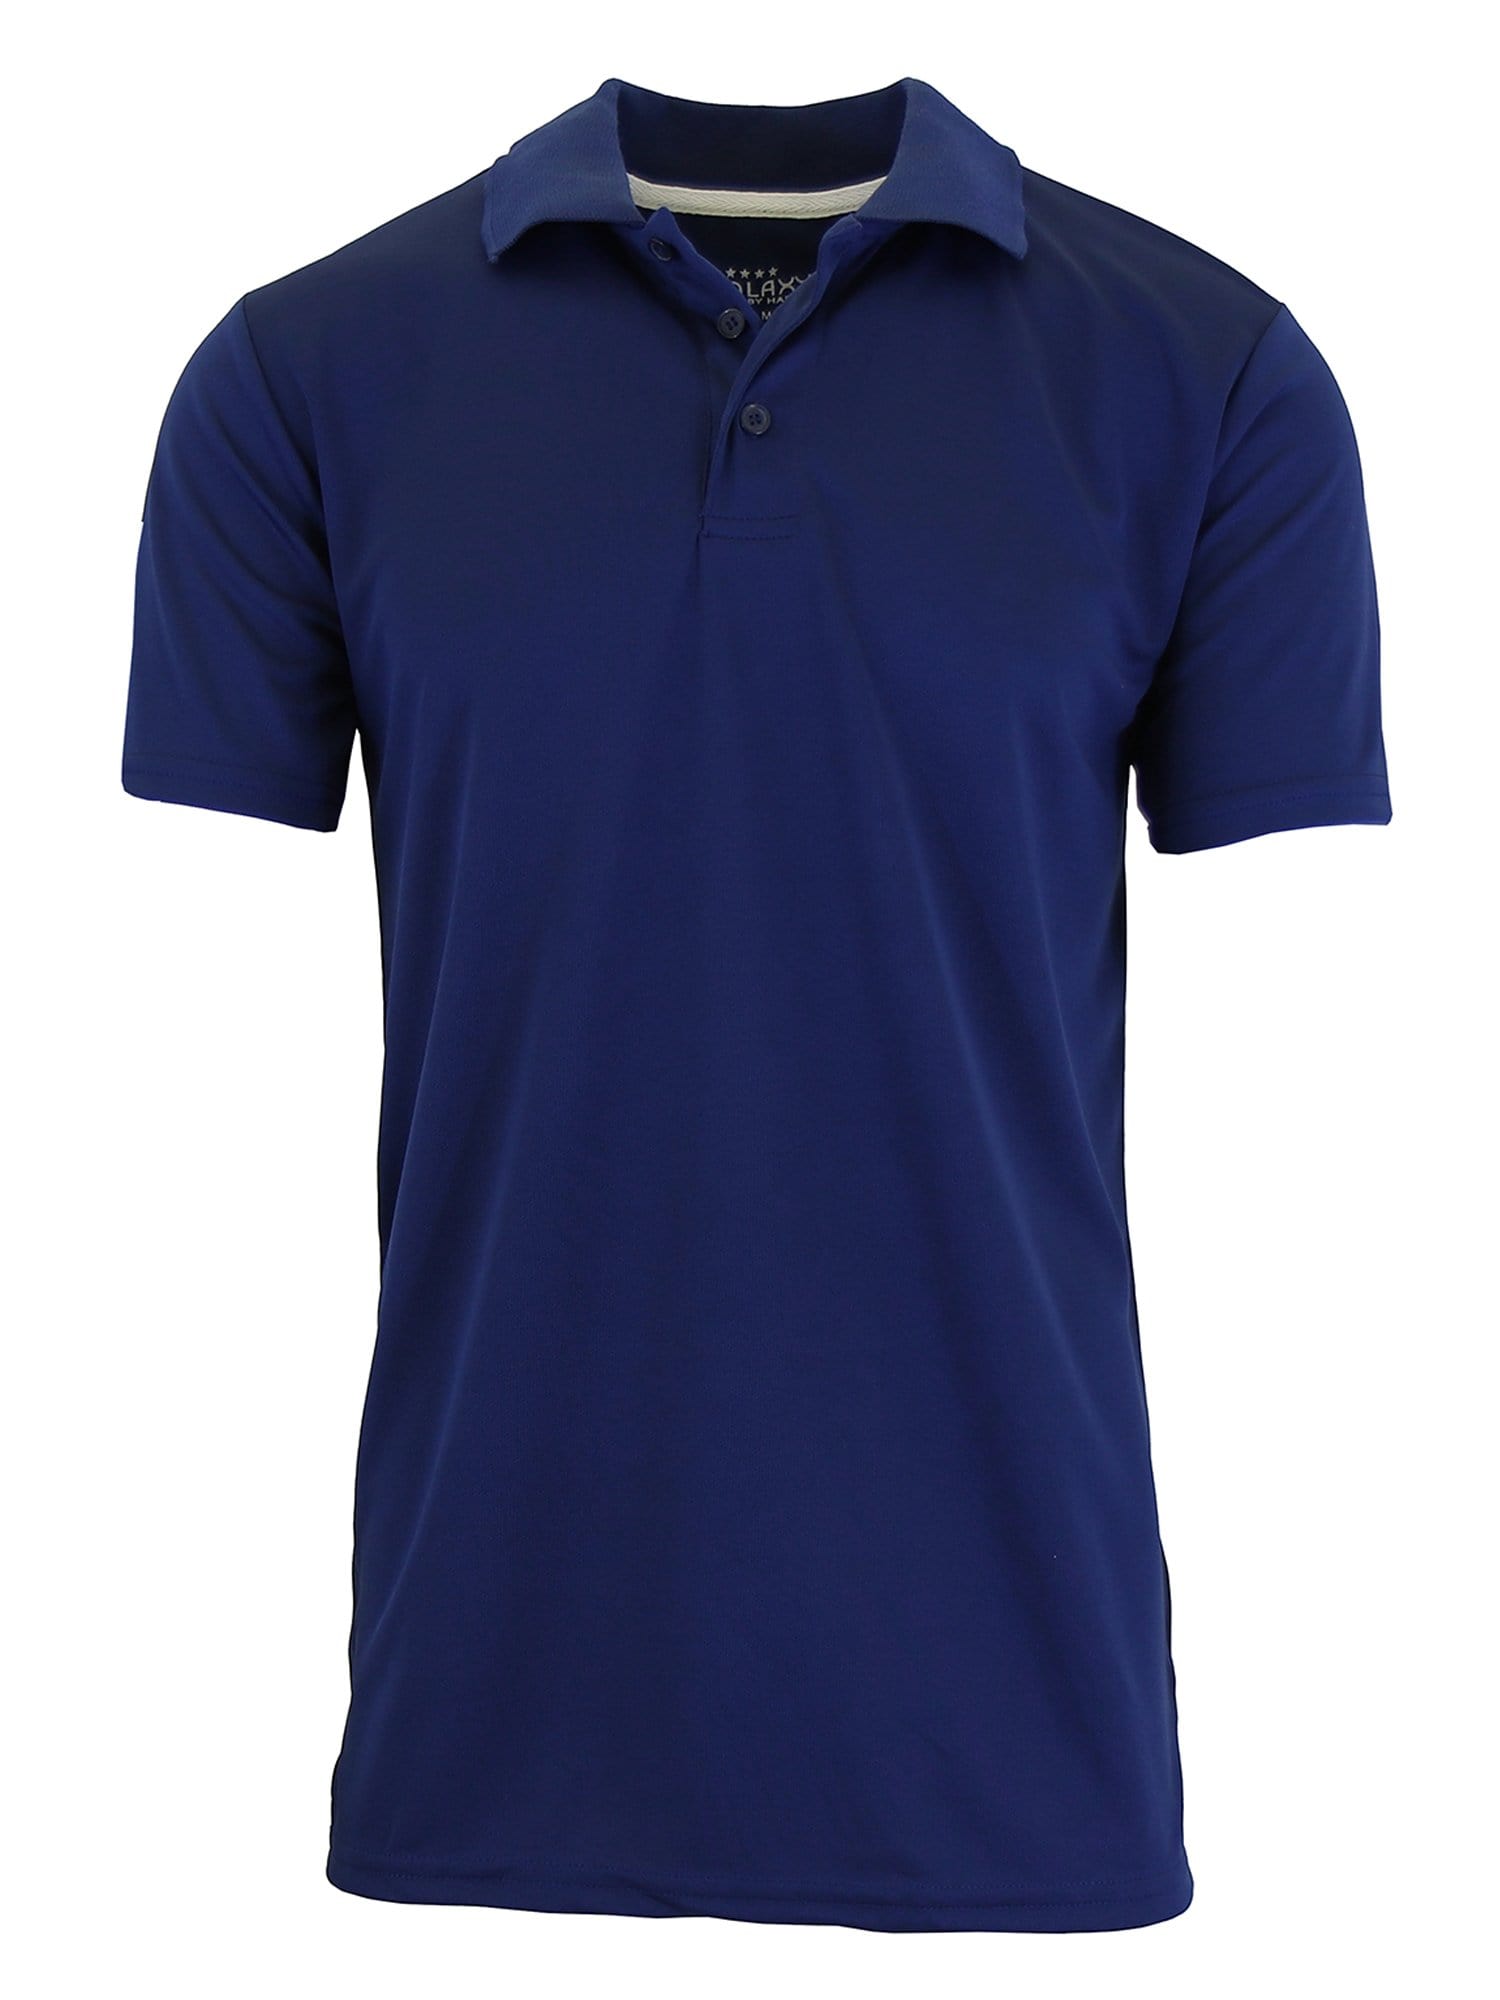 Men's Dry Fit Moisture-Wicking Polo Shirt - GalaxybyHarvic